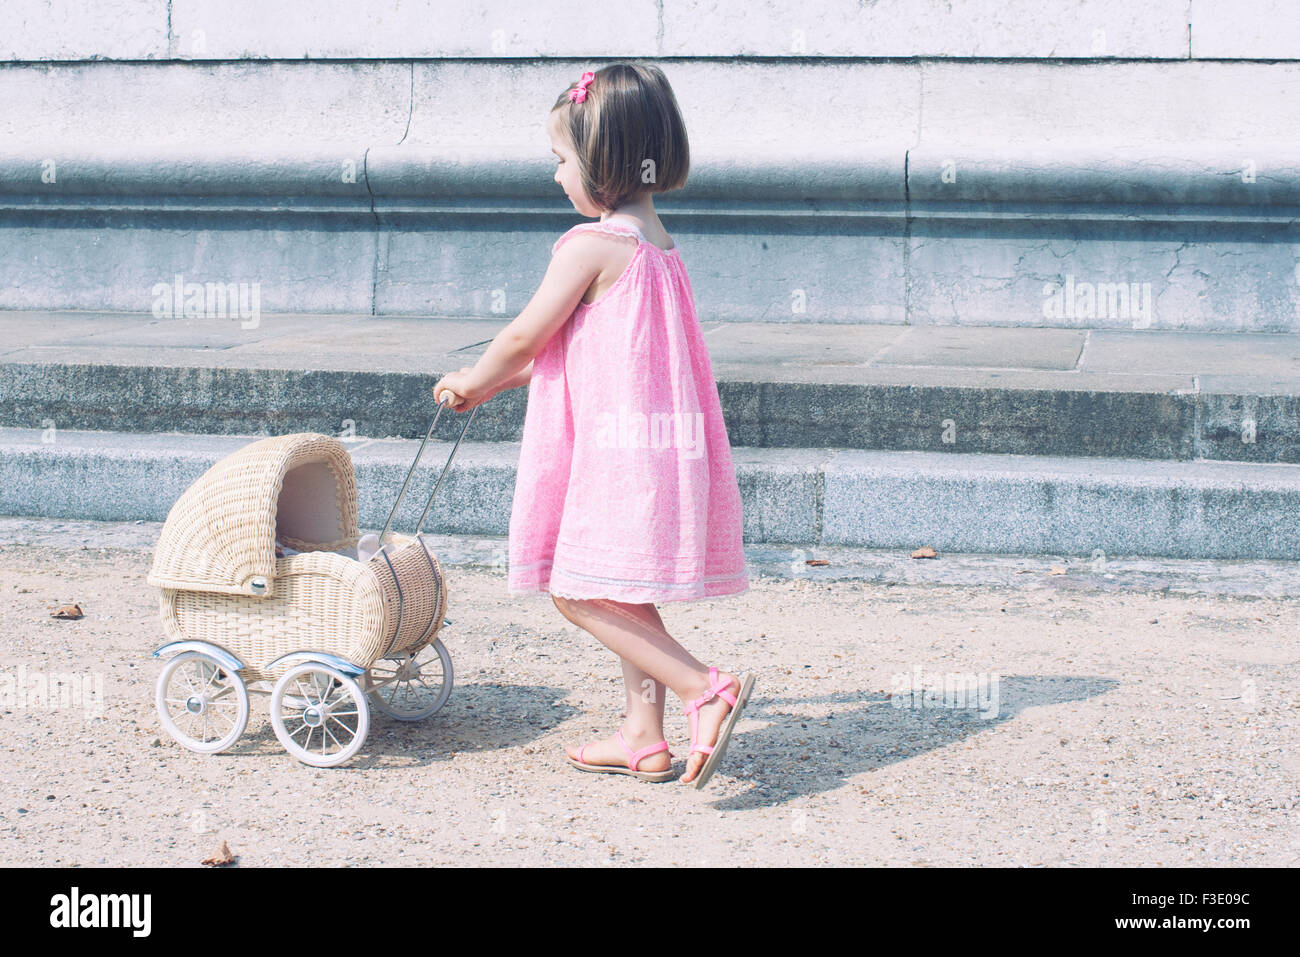 Little girl pushing toy baby carriage Stock Photo